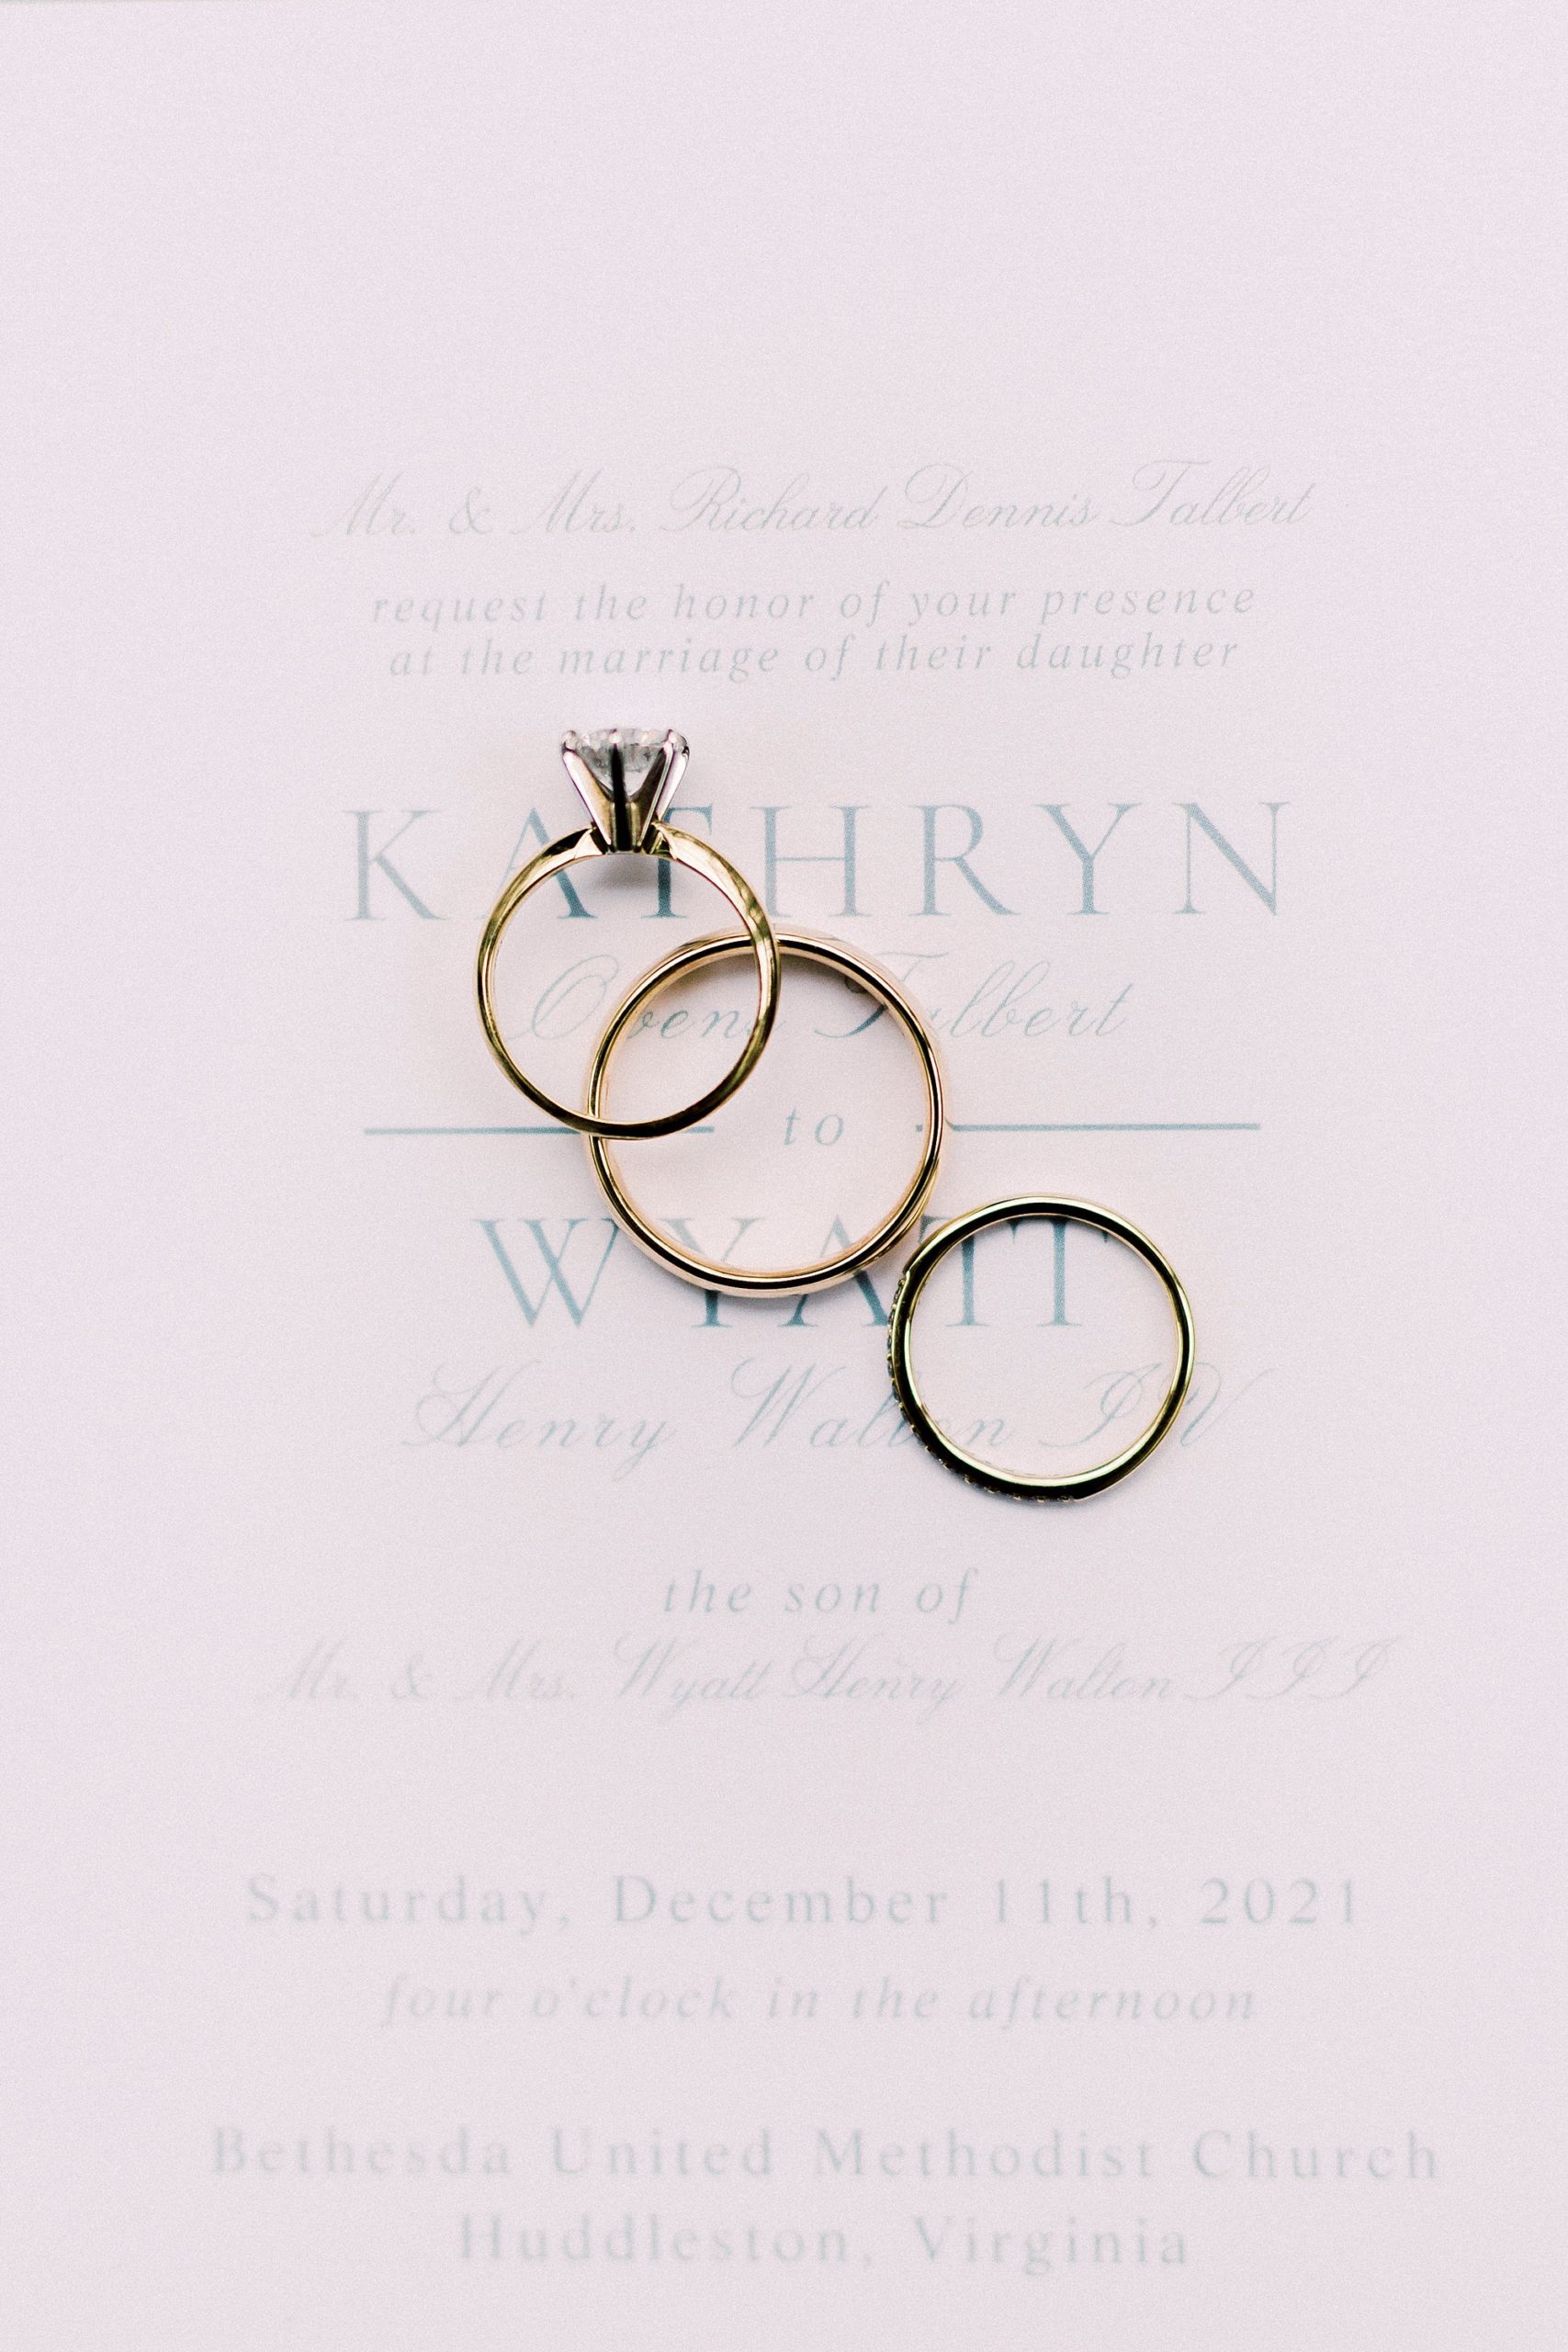 gold wedding bands rest on invitation suite for romantic winter wedding in Bedford VA